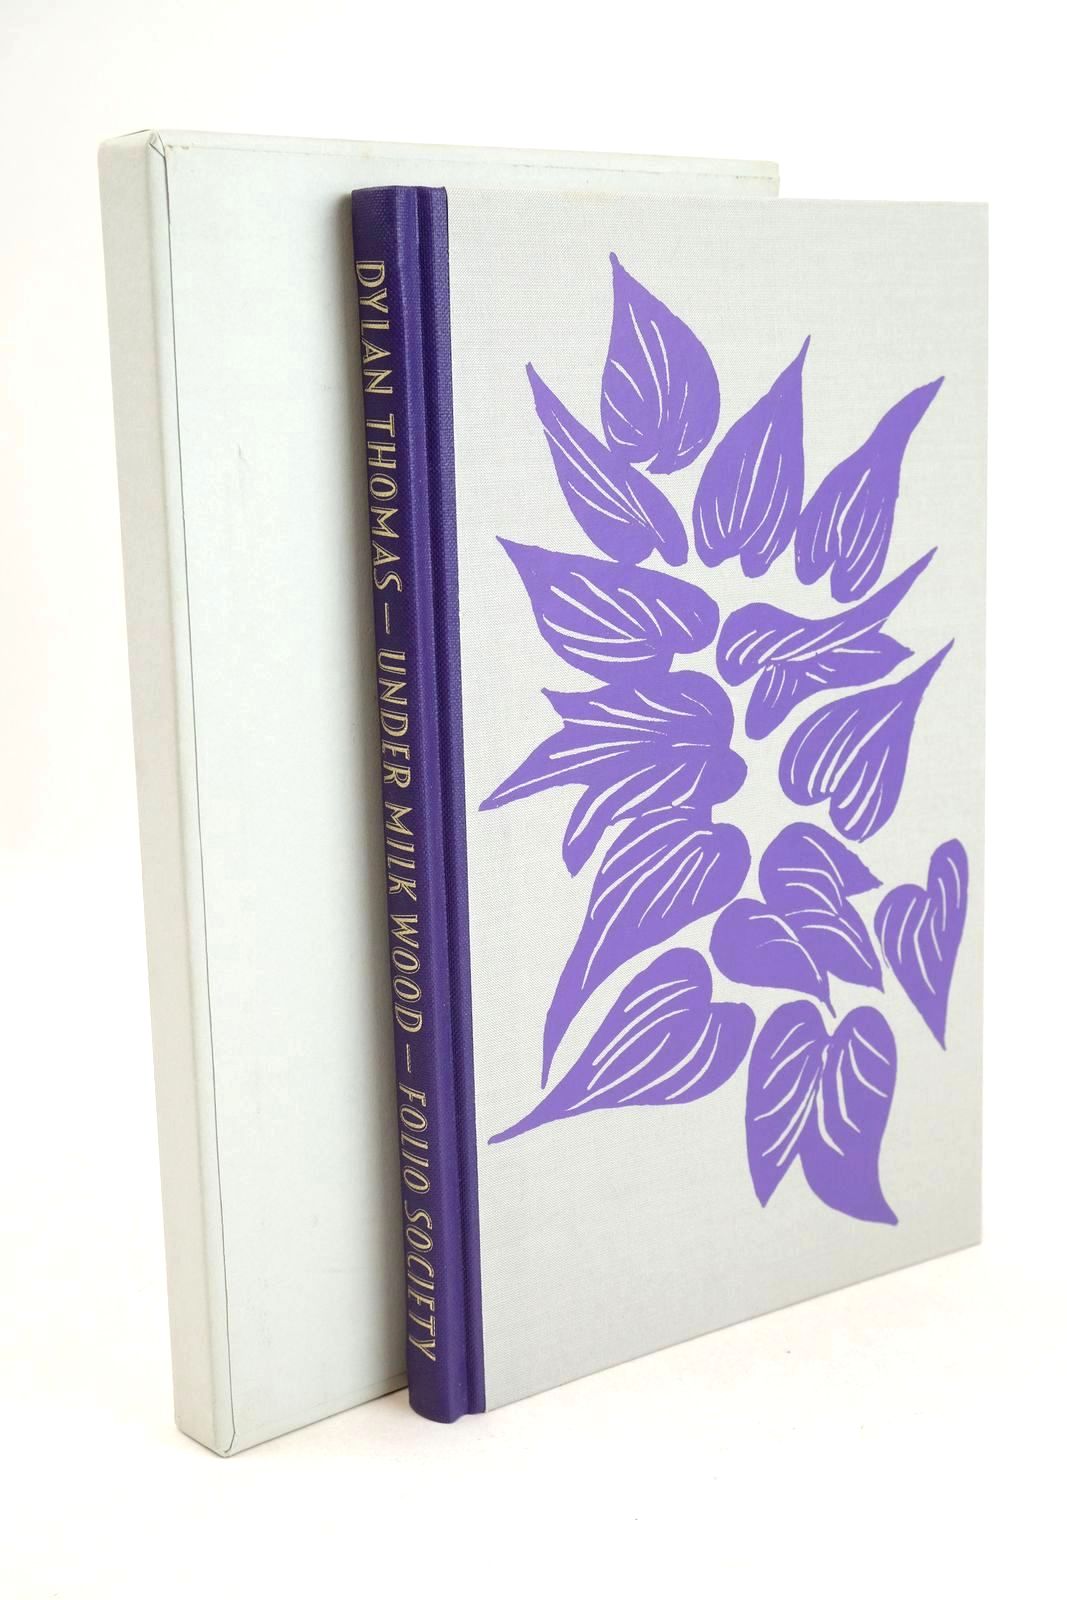 Photo of UNDER MILK WOOD written by Thomas, Dylan Cleverdon, Douglas illustrated by Richards, Ceri published by Folio Society (STOCK CODE: 1326007)  for sale by Stella & Rose's Books